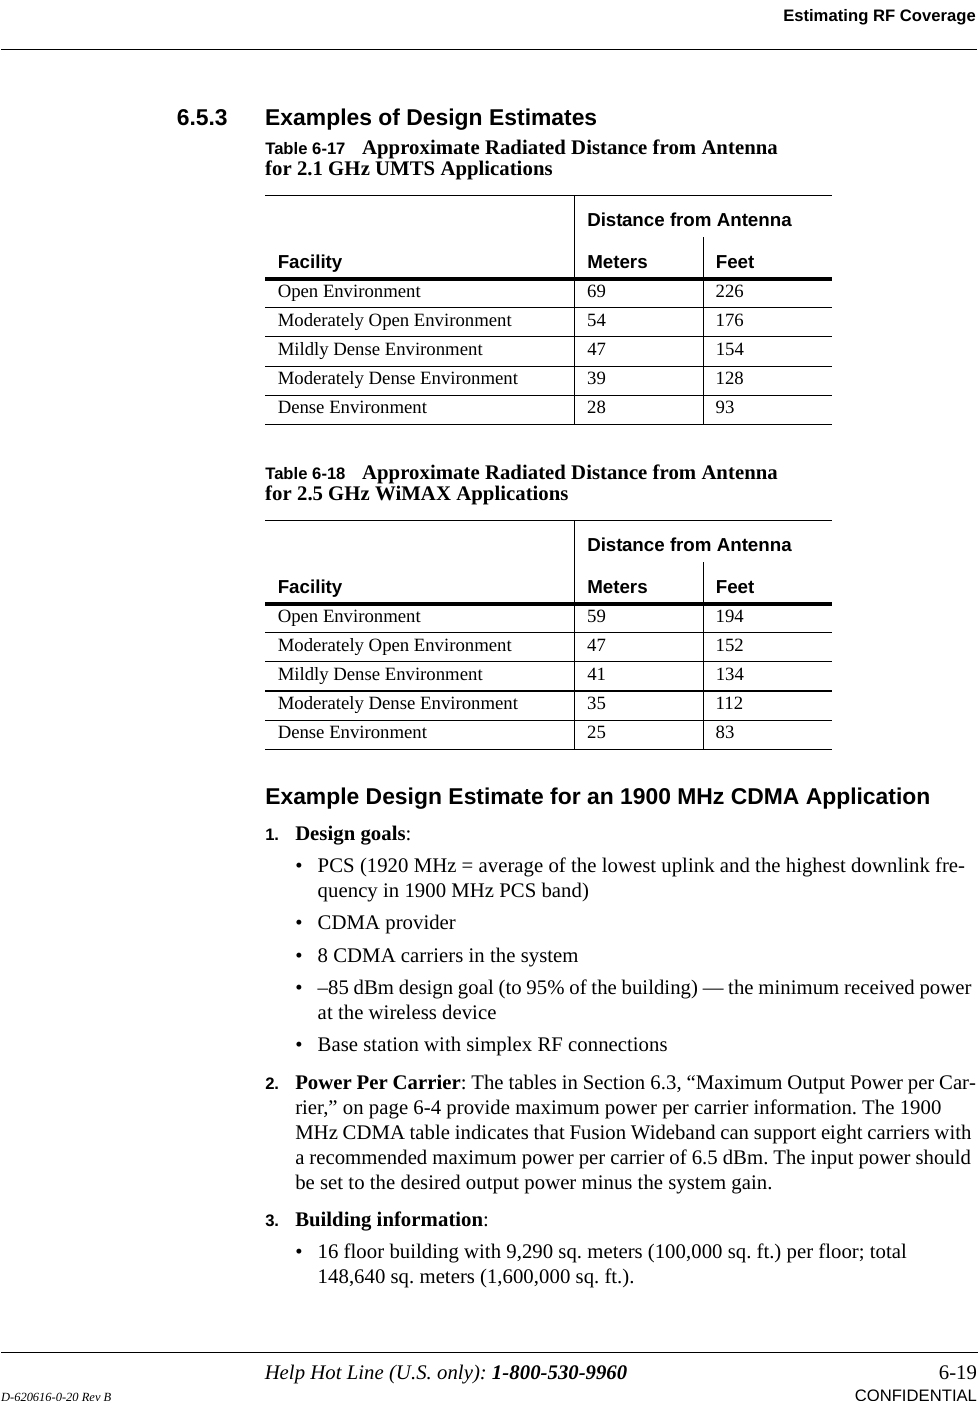 Help Hot Line (U.S. only): 1-800-530-9960 6-19D-620616-0-20 Rev B CONFIDENTIALEstimating RF Coverage6.5.3 Examples of Design EstimatesExample Design Estimate for an 1900 MHz CDMA Application1. Design goals:• PCS (1920 MHz = average of the lowest uplink and the highest downlink fre-quency in 1900 MHz PCS band)•CDMA provider• 8 CDMA carriers in the system• –85 dBm design goal (to 95% of the building) — the minimum received power at the wireless device• Base station with simplex RF connections2. Power Per Carrier: The tables in Section 6.3, “Maximum Output Power per Car-rier,” on page 6-4 provide maximum power per carrier information. The 1900 MHz CDMA table indicates that Fusion Wideband can support eight carriers with a recommended maximum power per carrier of 6.5 dBm. The input power should be set to the desired output power minus the system gain.3. Building information:• 16 floor building with 9,290 sq. meters (100,000 sq. ft.) per floor; total 148,640 sq. meters (1,600,000 sq. ft.).Table 6-17 Approximate Radiated Distance from Antenna for 2.1 GHz UMTS ApplicationsFacilityDistance from AntennaMeters FeetOpen Environment 69 226Moderately Open Environment 54 176Mildly Dense Environment 47 154Moderately Dense Environment 39 128Dense Environment 28 93Table 6-18 Approximate Radiated Distance from Antenna for 2.5 GHz WiMAX ApplicationsFacilityDistance from AntennaMeters FeetOpen Environment 59 194Moderately Open Environment 47 152Mildly Dense Environment 41 134Moderately Dense Environment 35 112Dense Environment 25 83